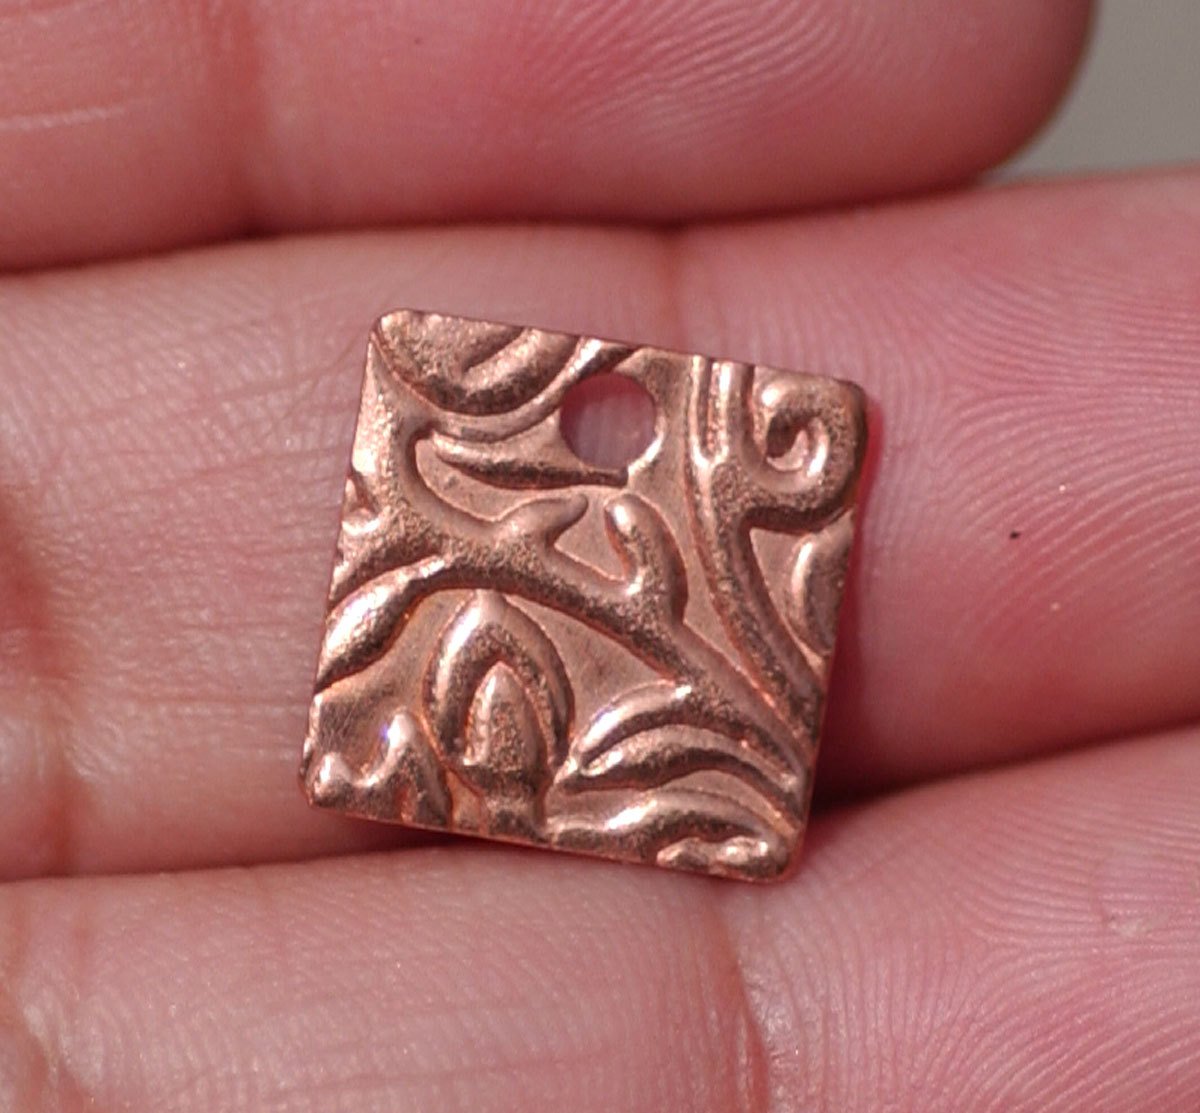 Copper 26g 12mm Blank Square Lotus Flowers Texture Cutout for Blanks Enameling Stamping Texturing - 8 pieces